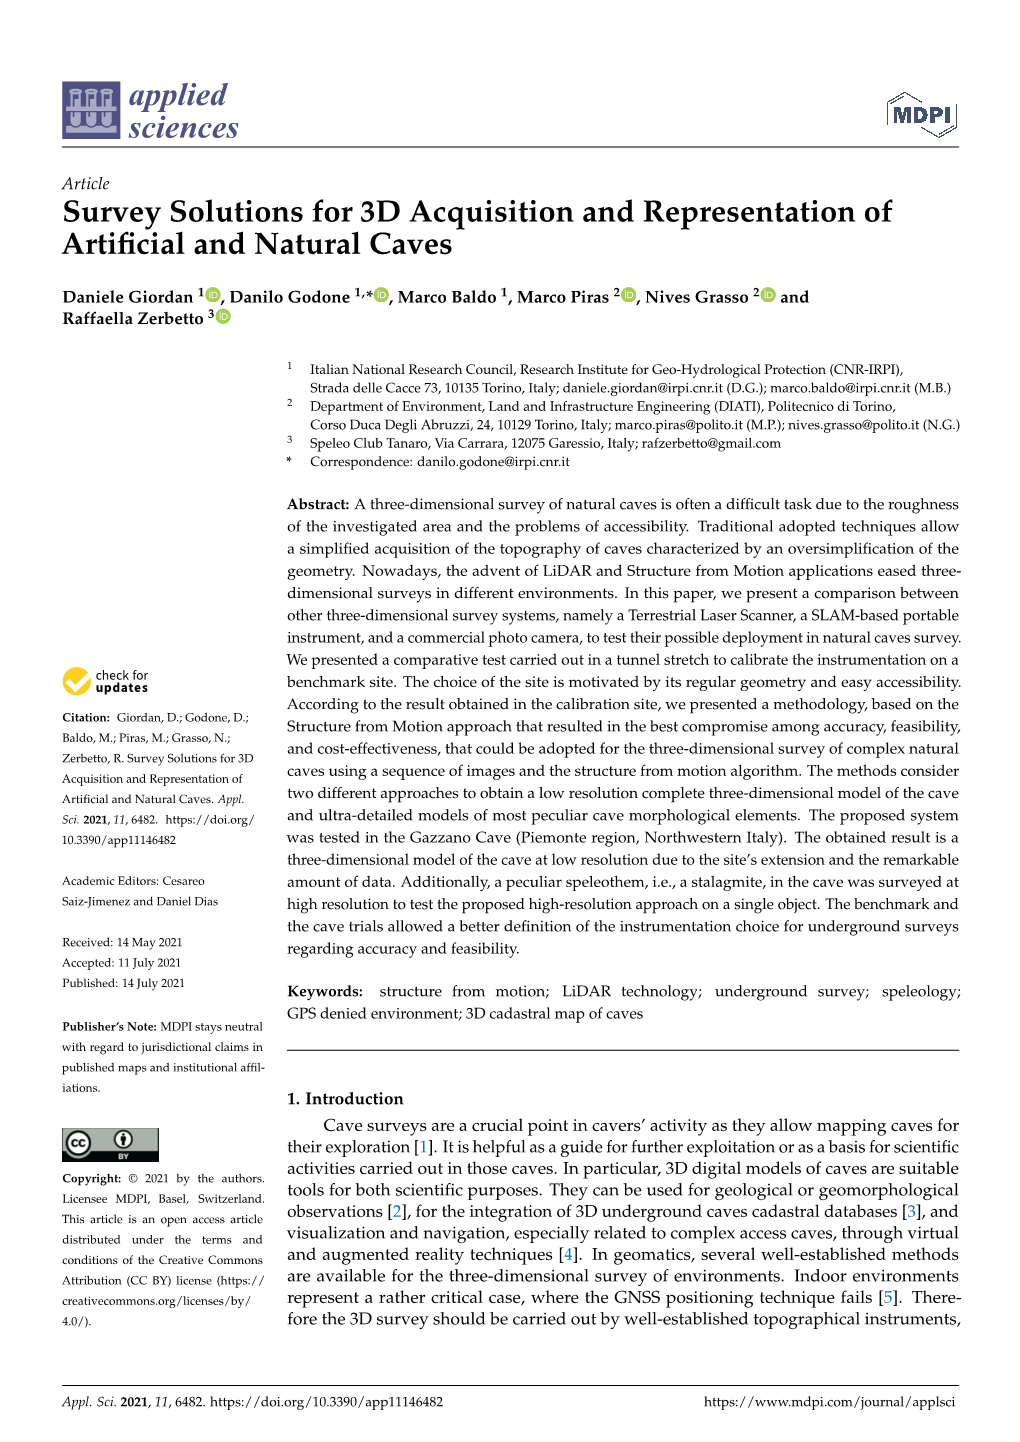 Survey Solutions for 3D Acquisition and Representation of Artificial And